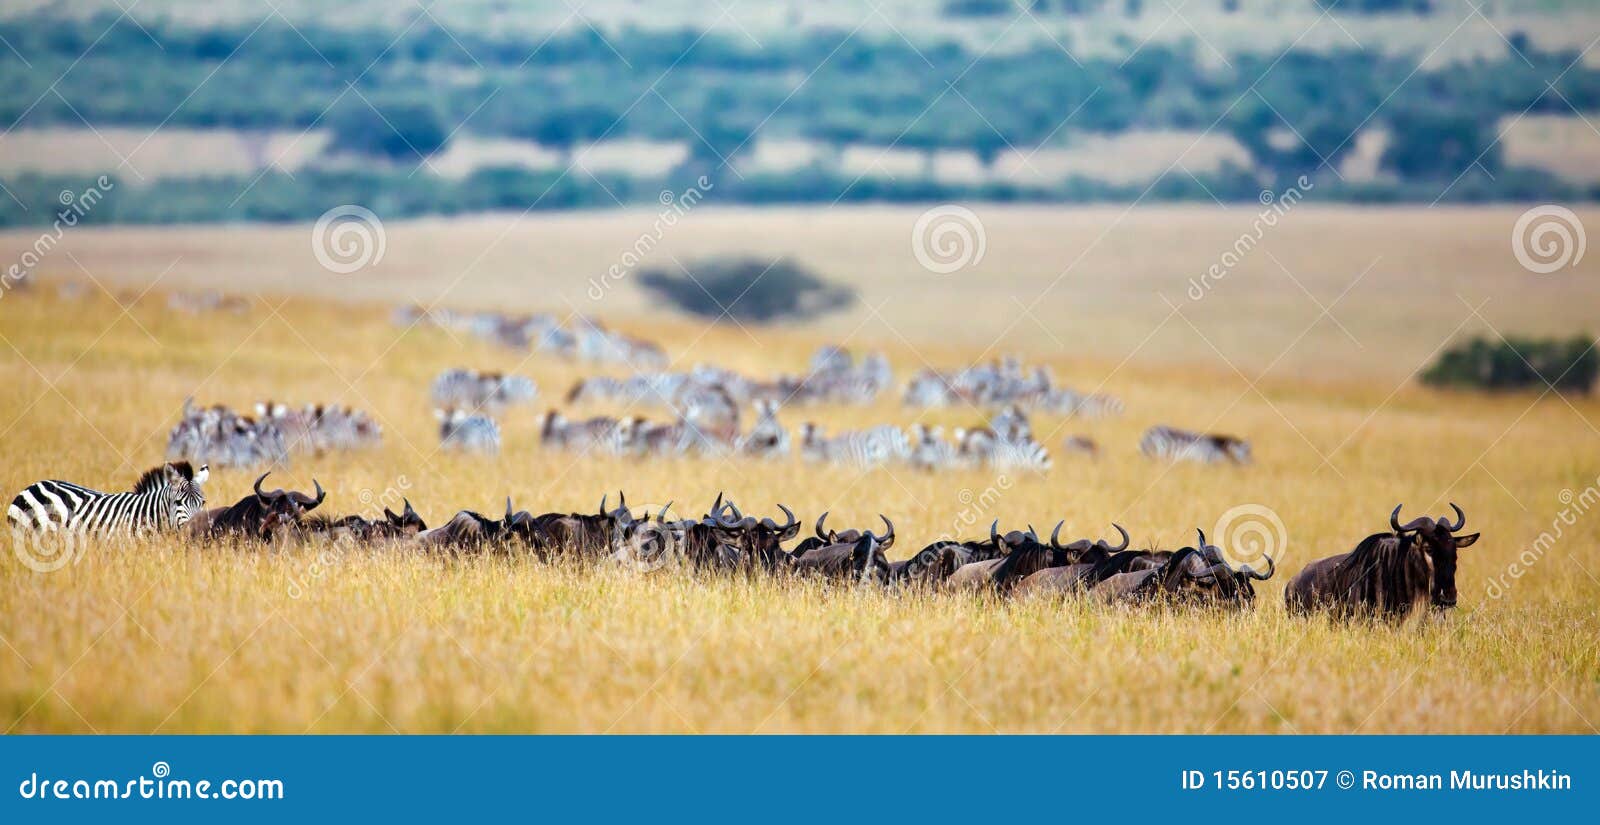 the chain of wildebeest and zebras migrate to the